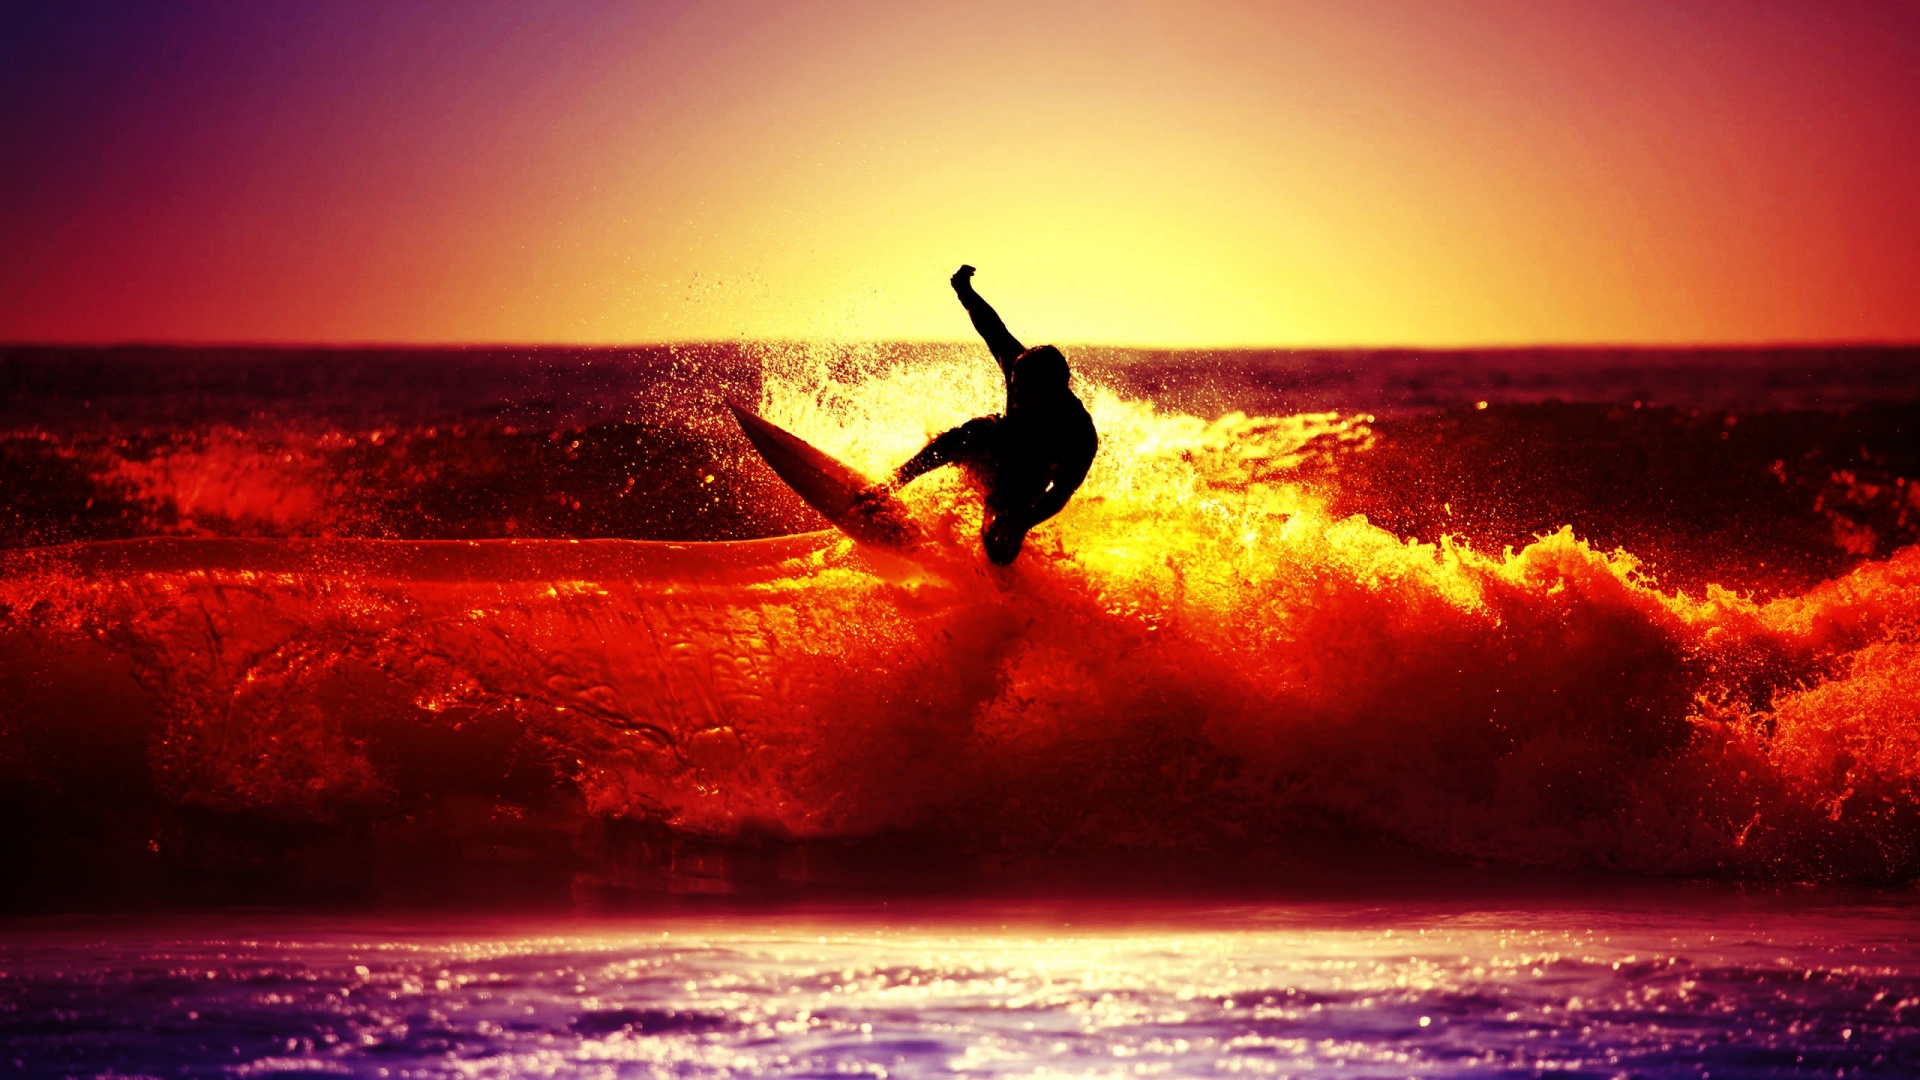 HD Surfing Wallpapers and Photos HD Sports Backgrounds